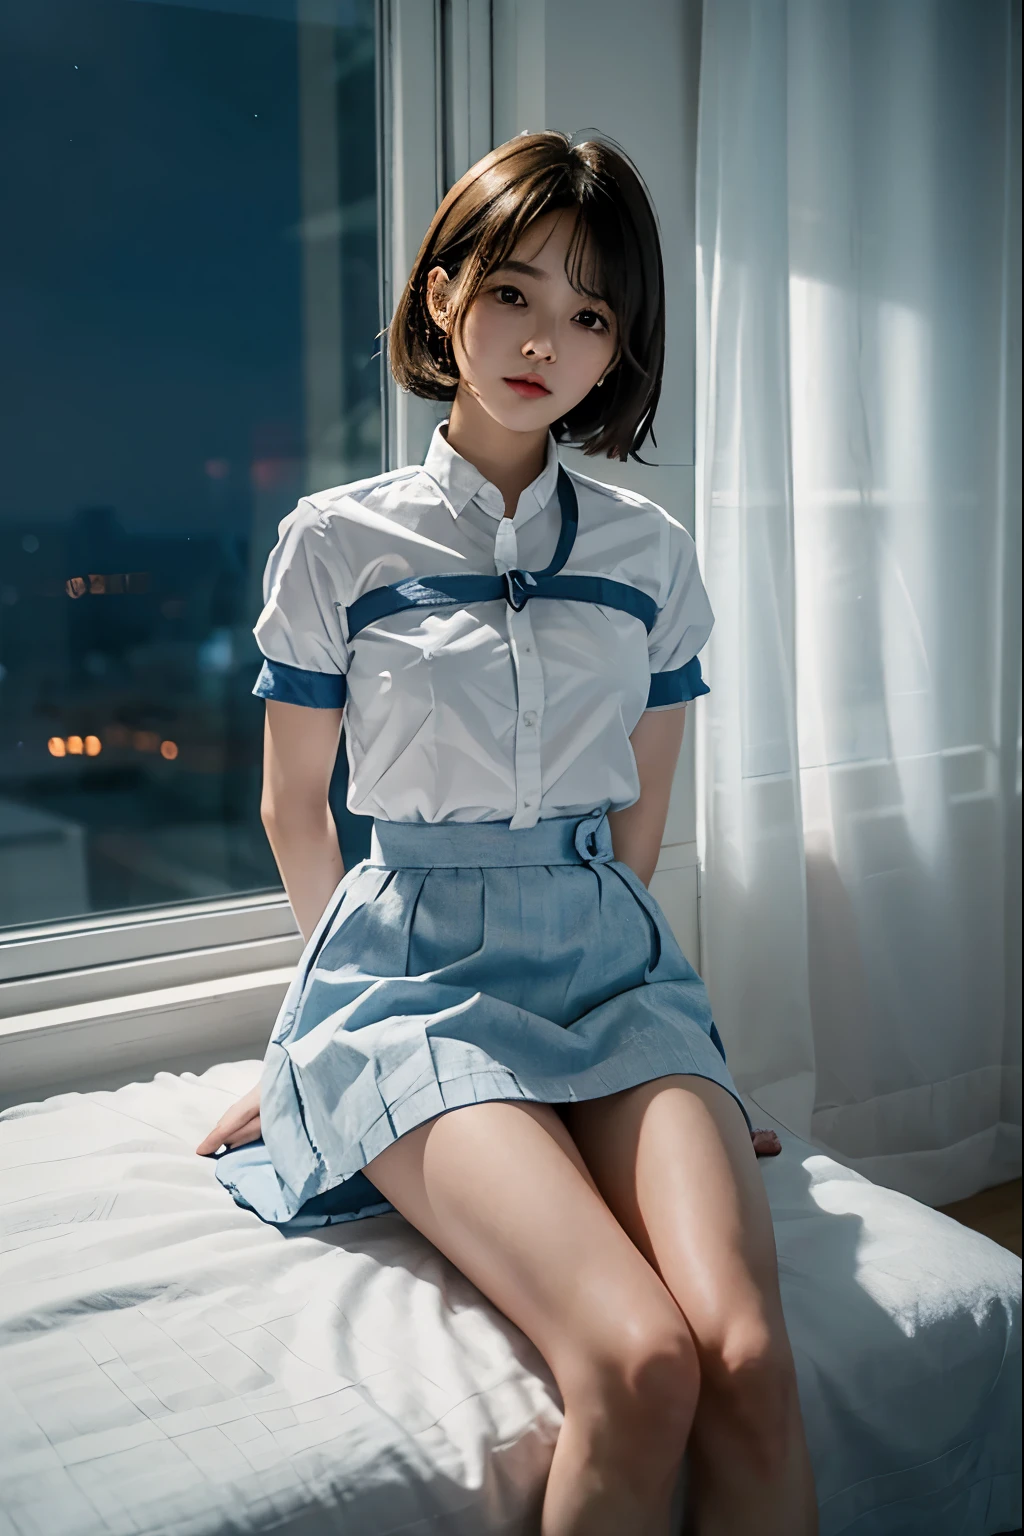 A cute girl is confined and tied up、In a room with the lights on at night、White under the blue skirt、Red short sleeve shirt、Sit with your feet together and forward、Beauty、30 years old、Medium build、Outside the window is night、